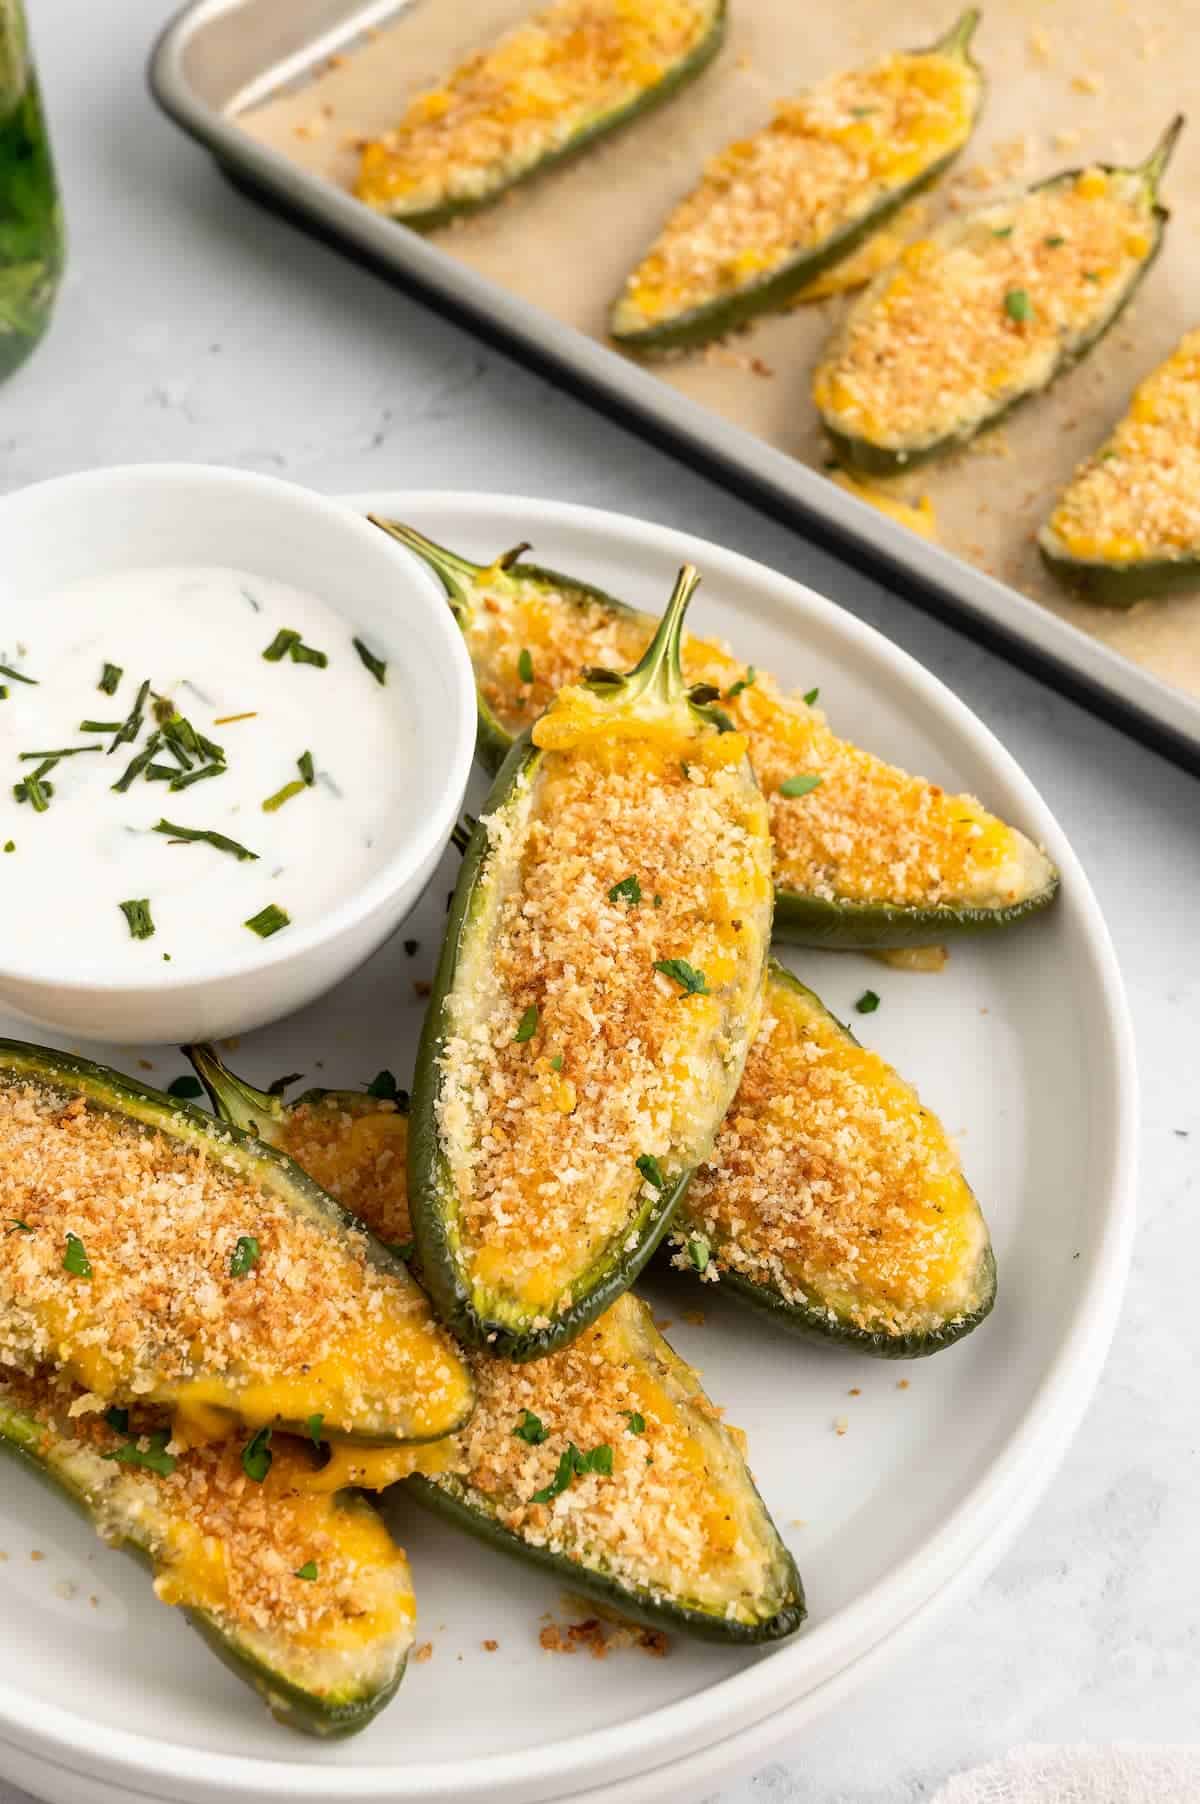 A plate of jalapeno poppers with dip on a white plate, with more poppers behind it on a baking sheet.